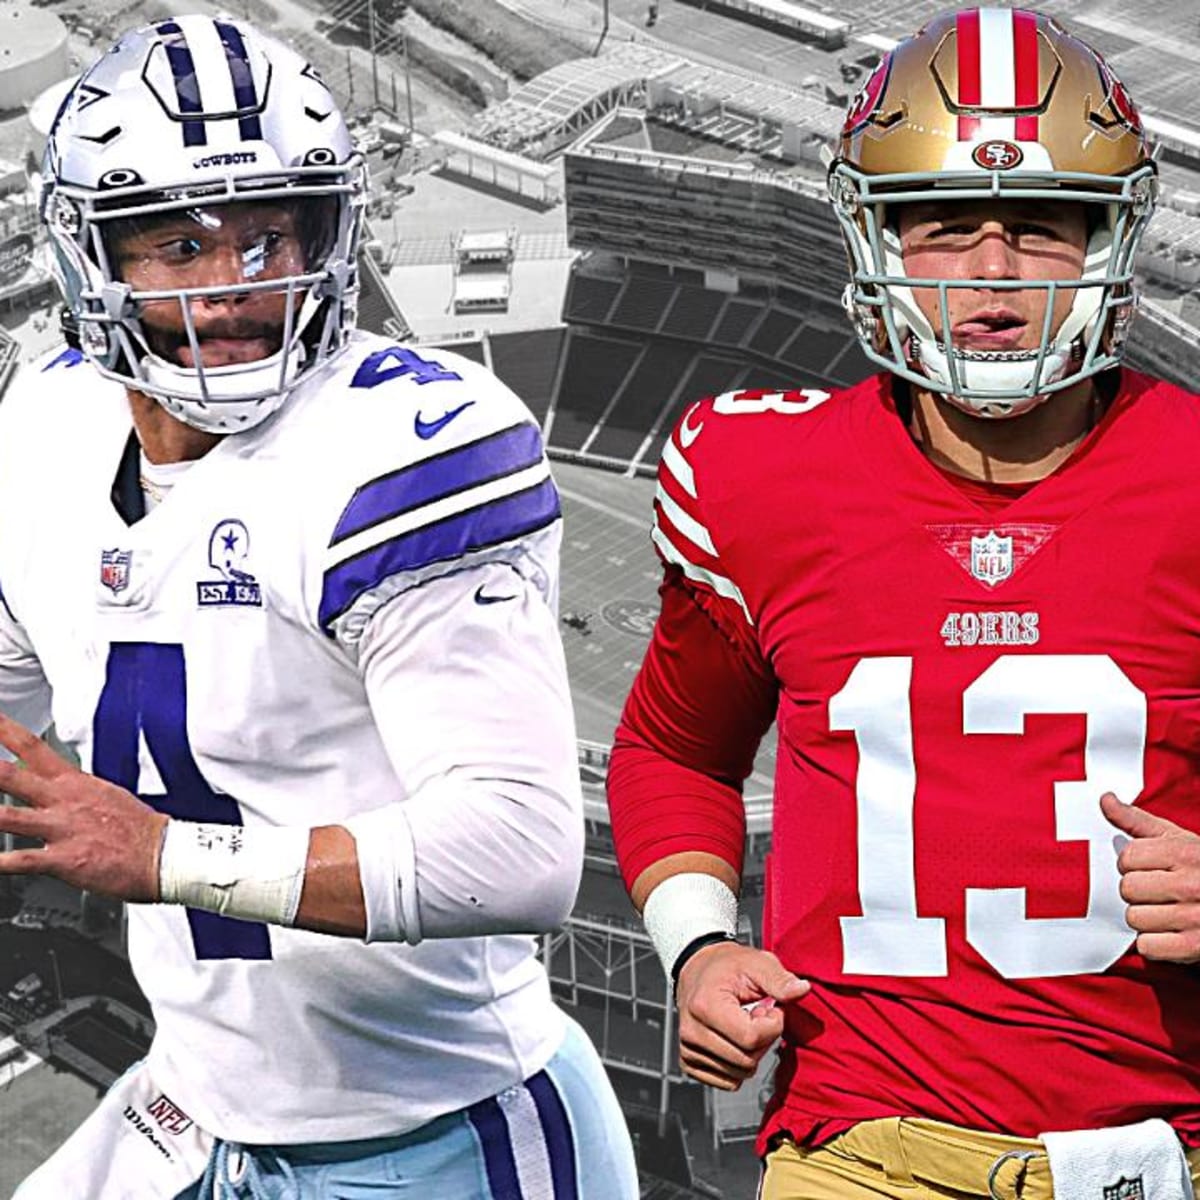 Cowboys vs. 49ers free live streams: How to watch 2023 NFL playoff